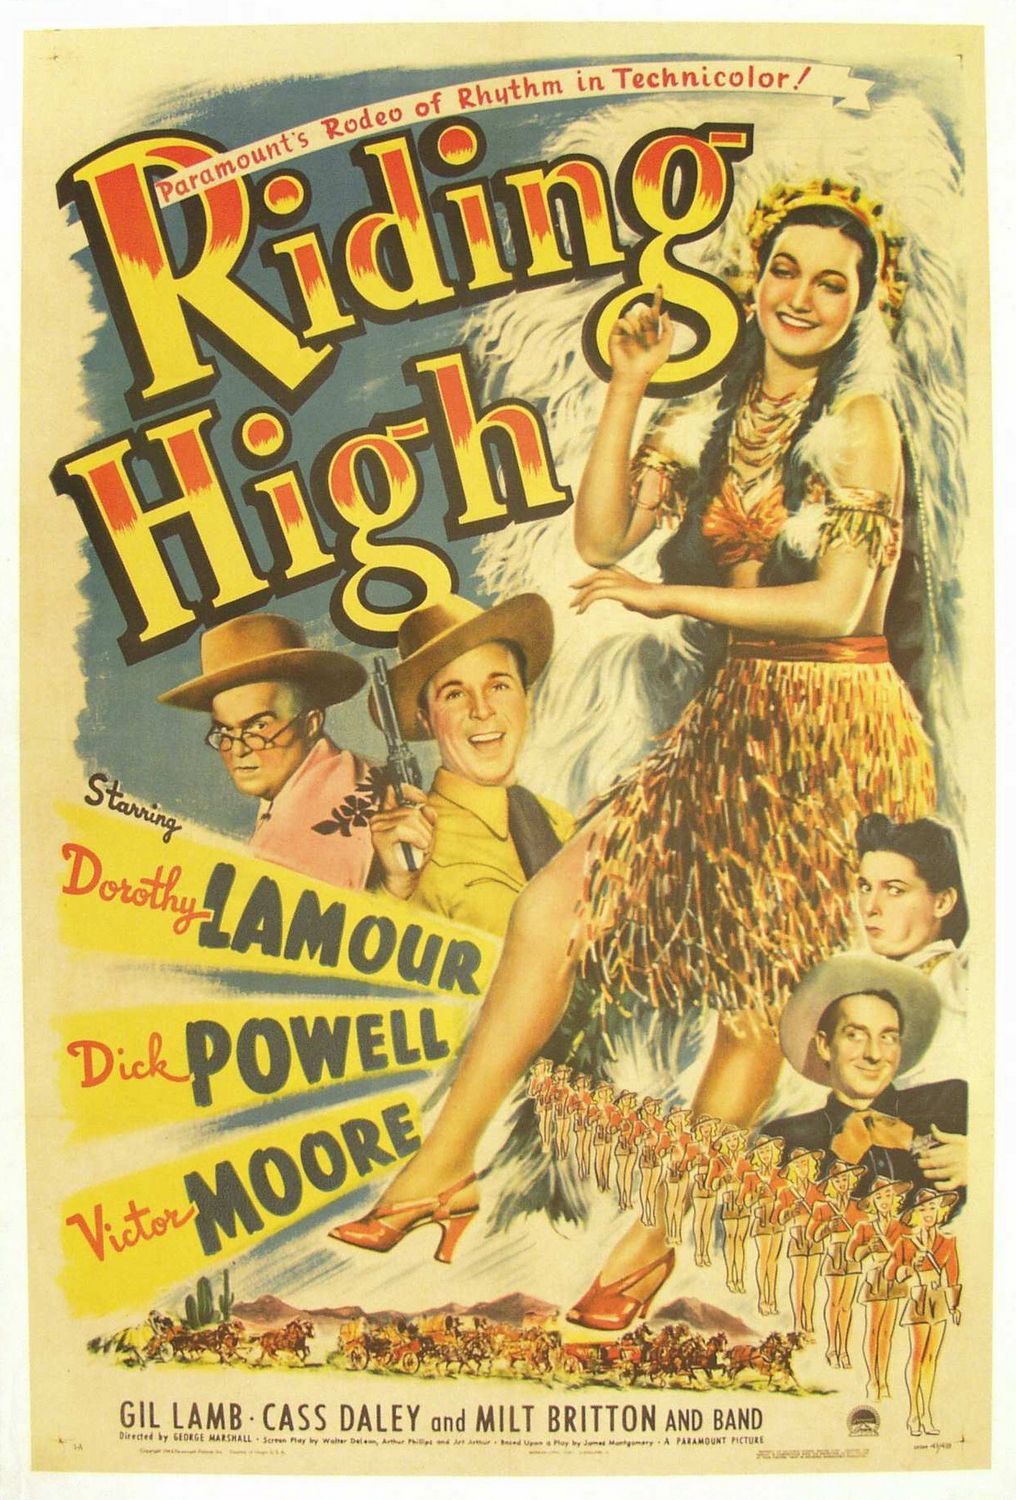 Extra Large Movie Poster Image for Riding High 